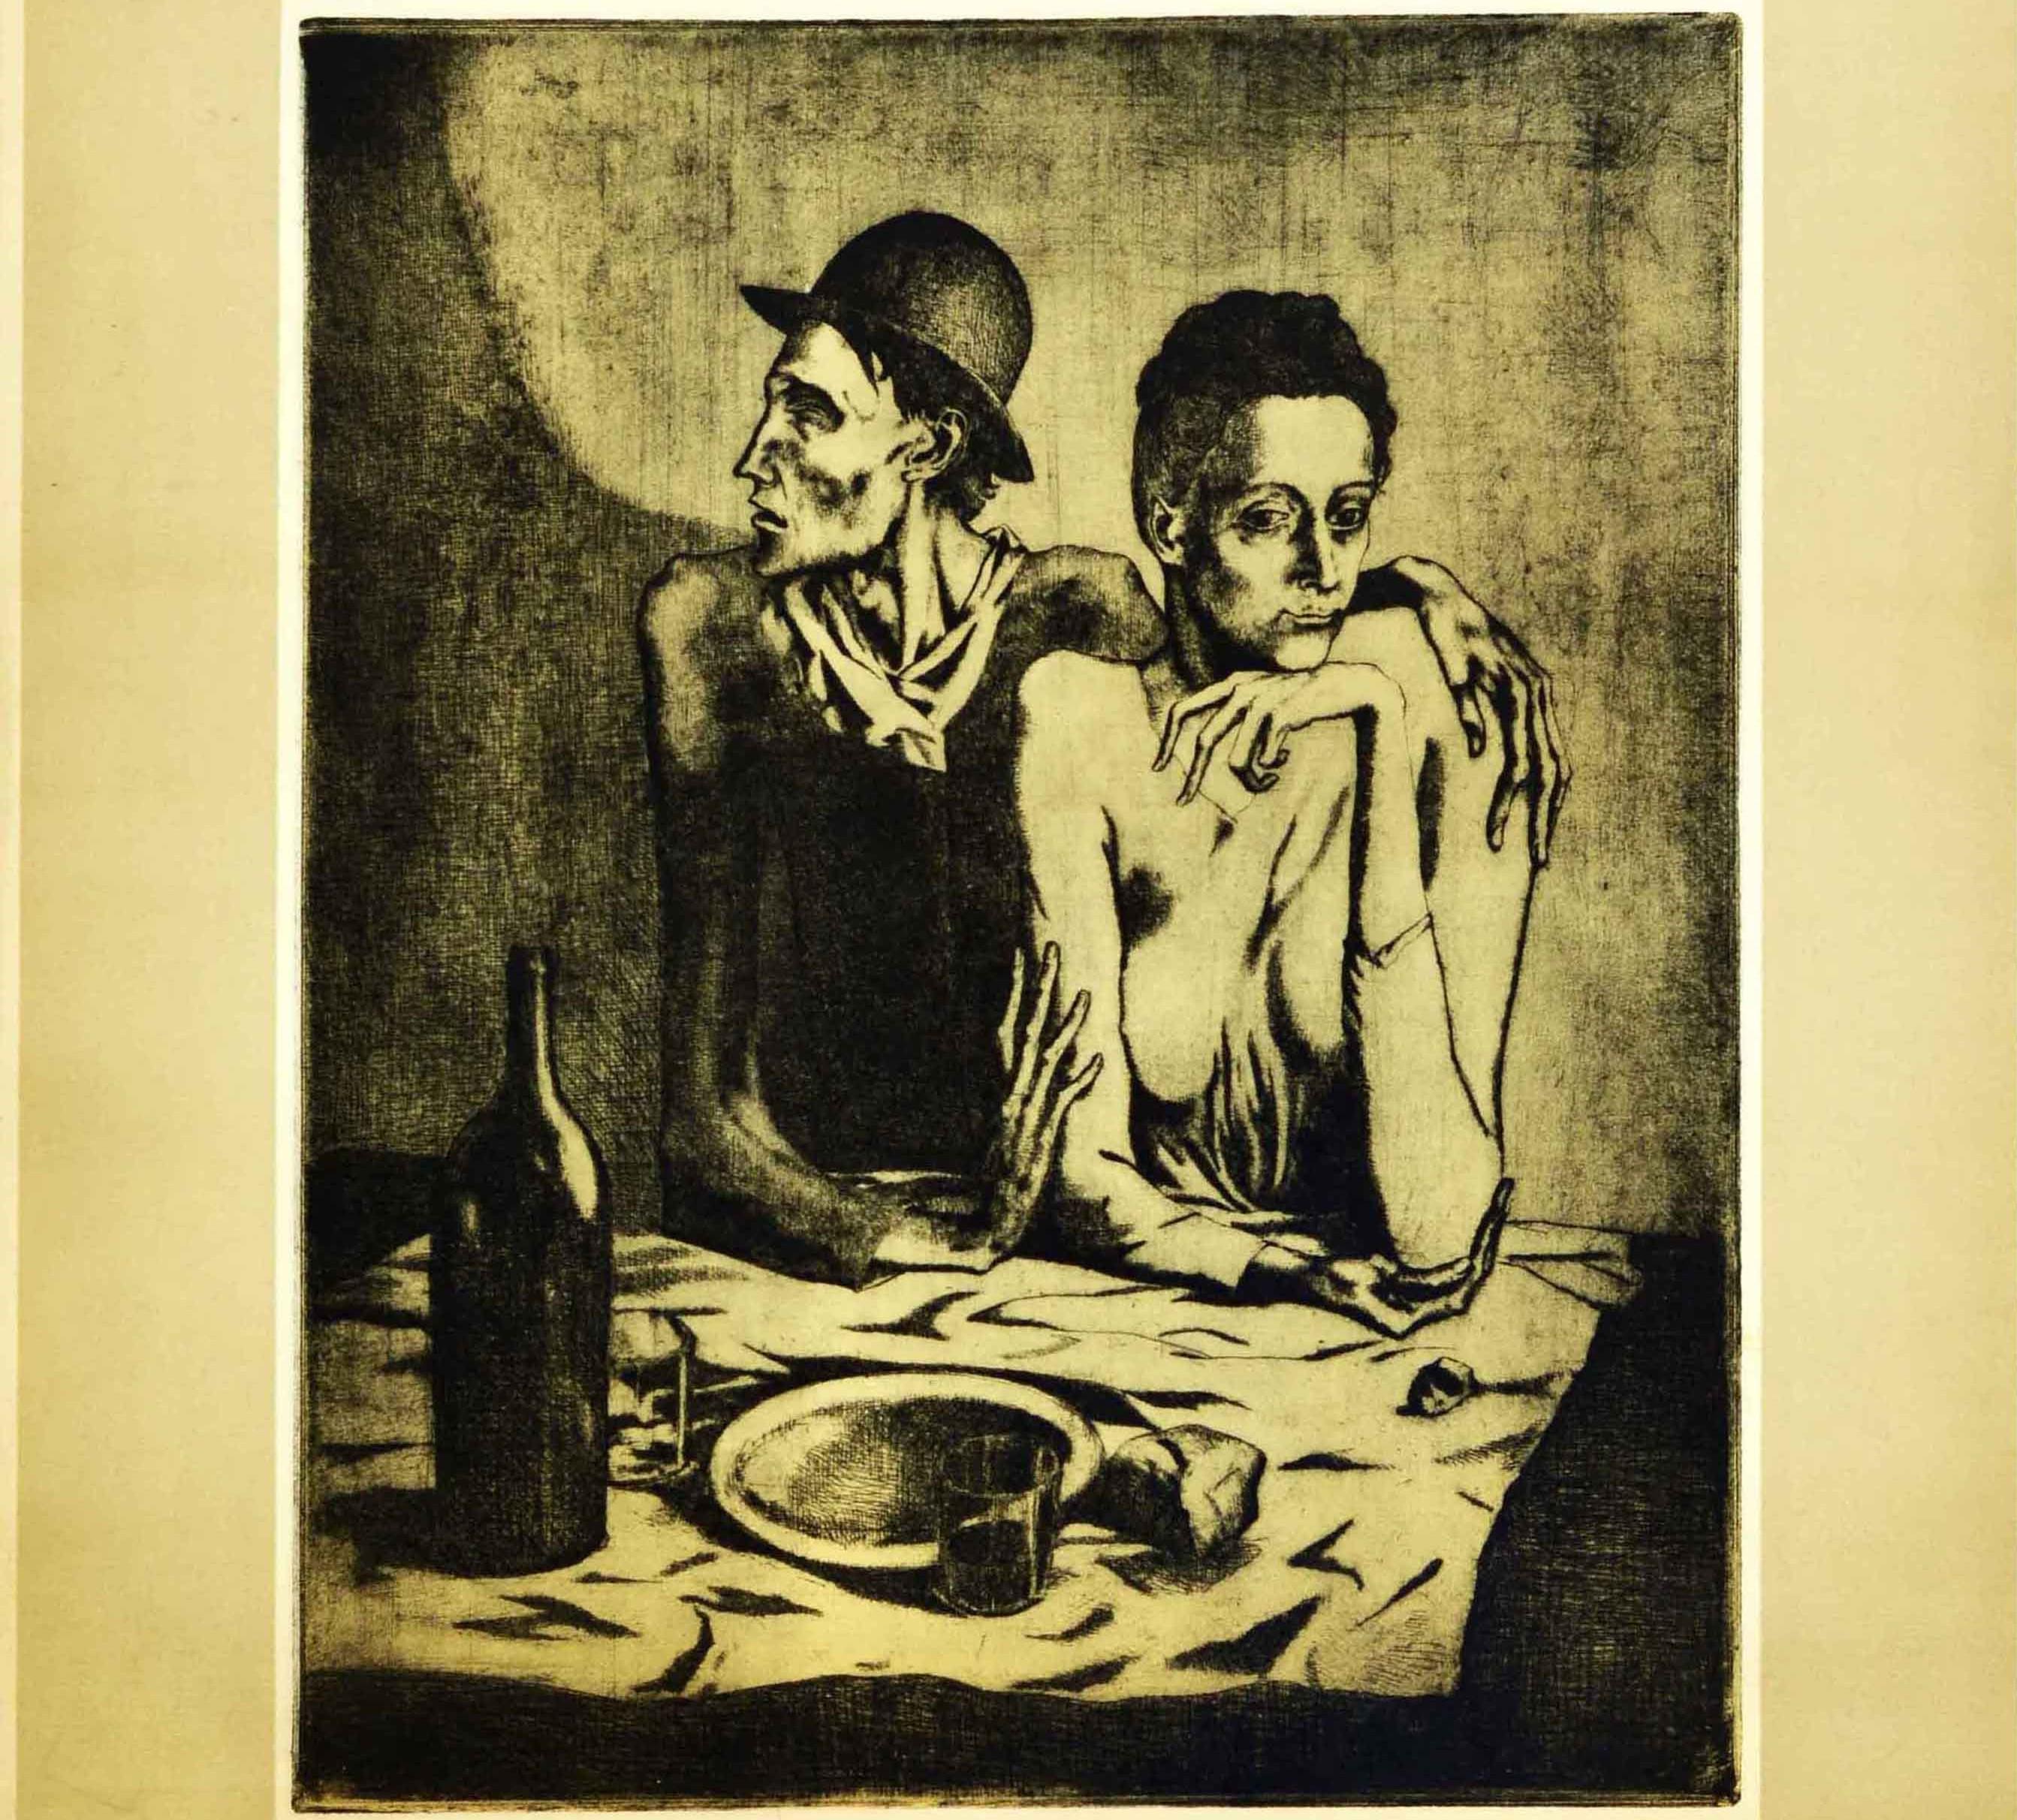 Original Vintage Art Poster Picasso Engraving Exhibition Le Repas Frugal Meal In Good Condition For Sale In London, GB